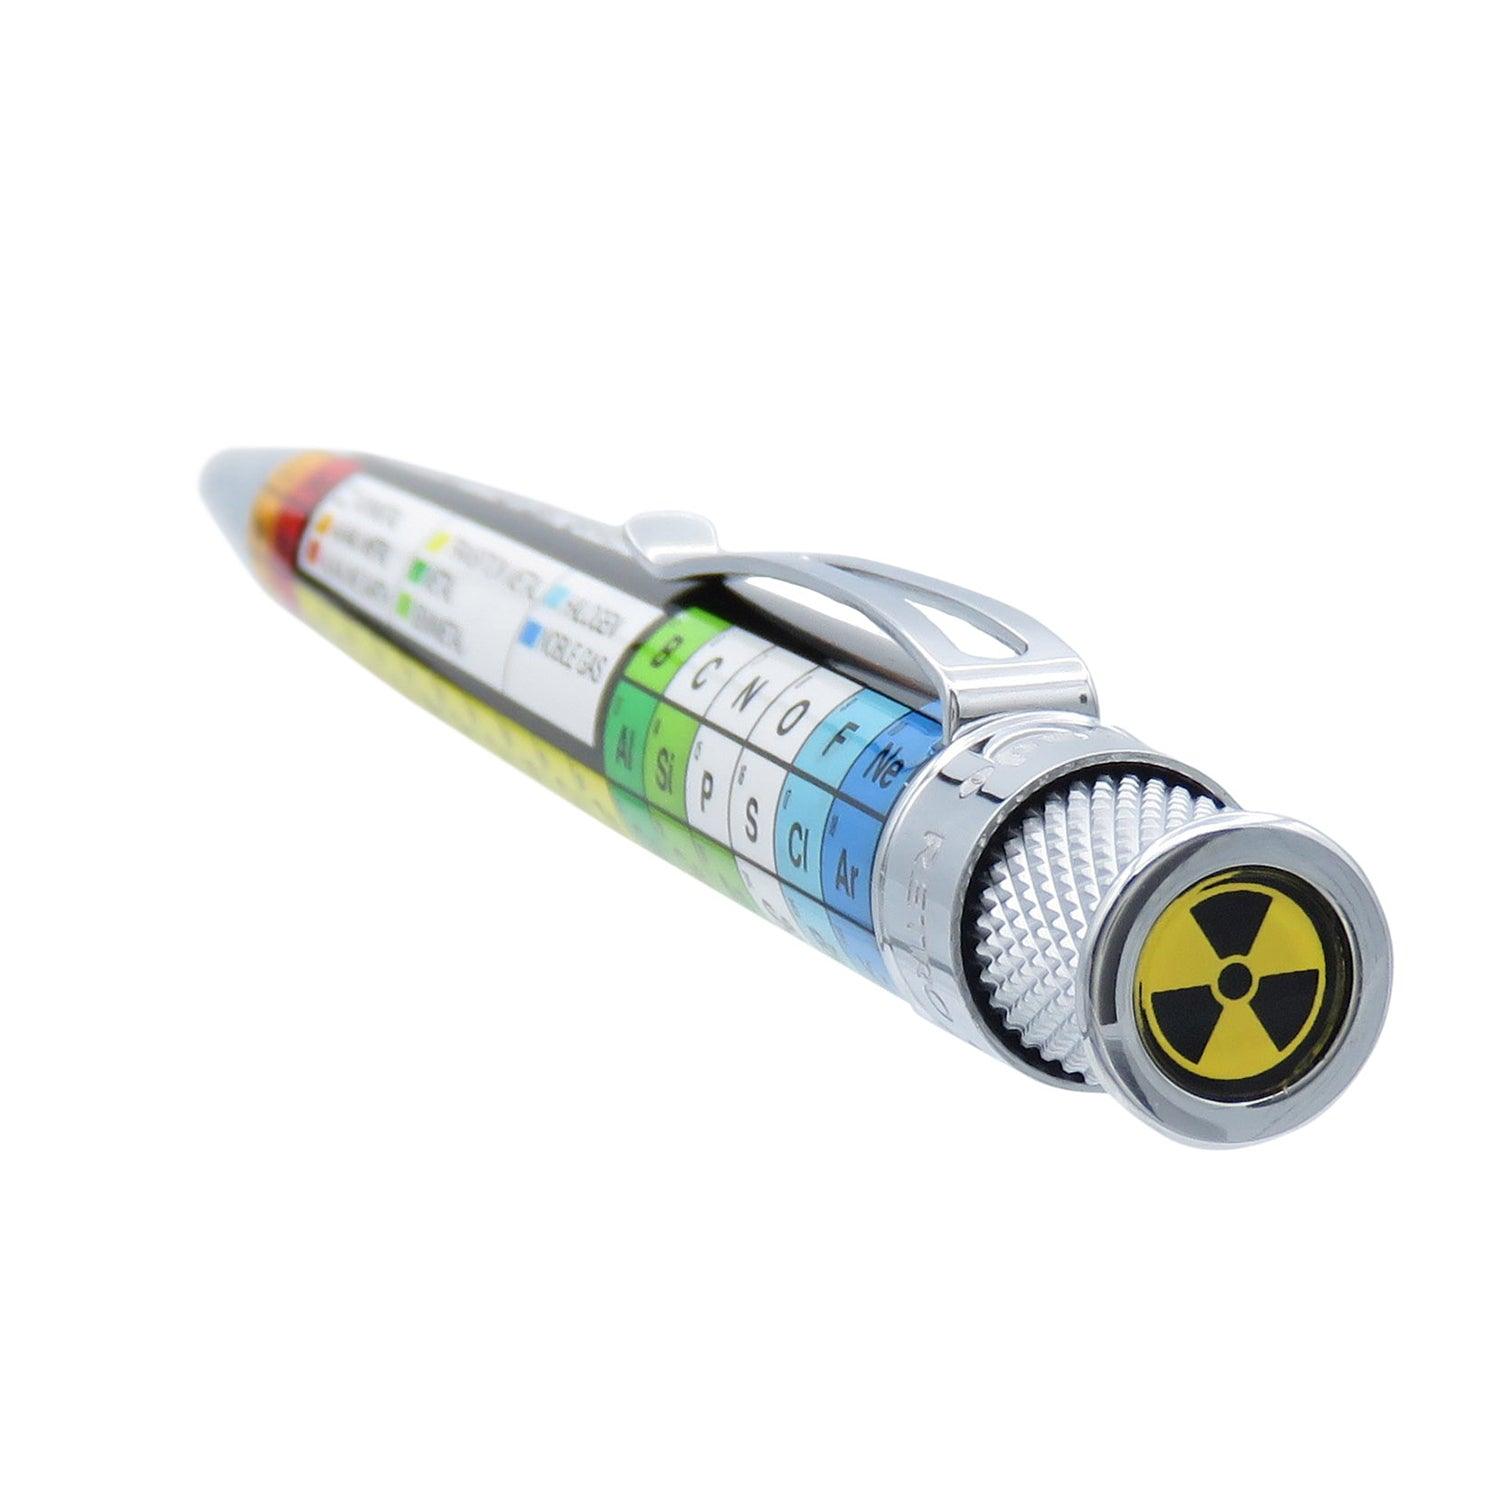 Retro Periodic Table Rollerball Pen - Pens and Pencils - Science Museum Shop